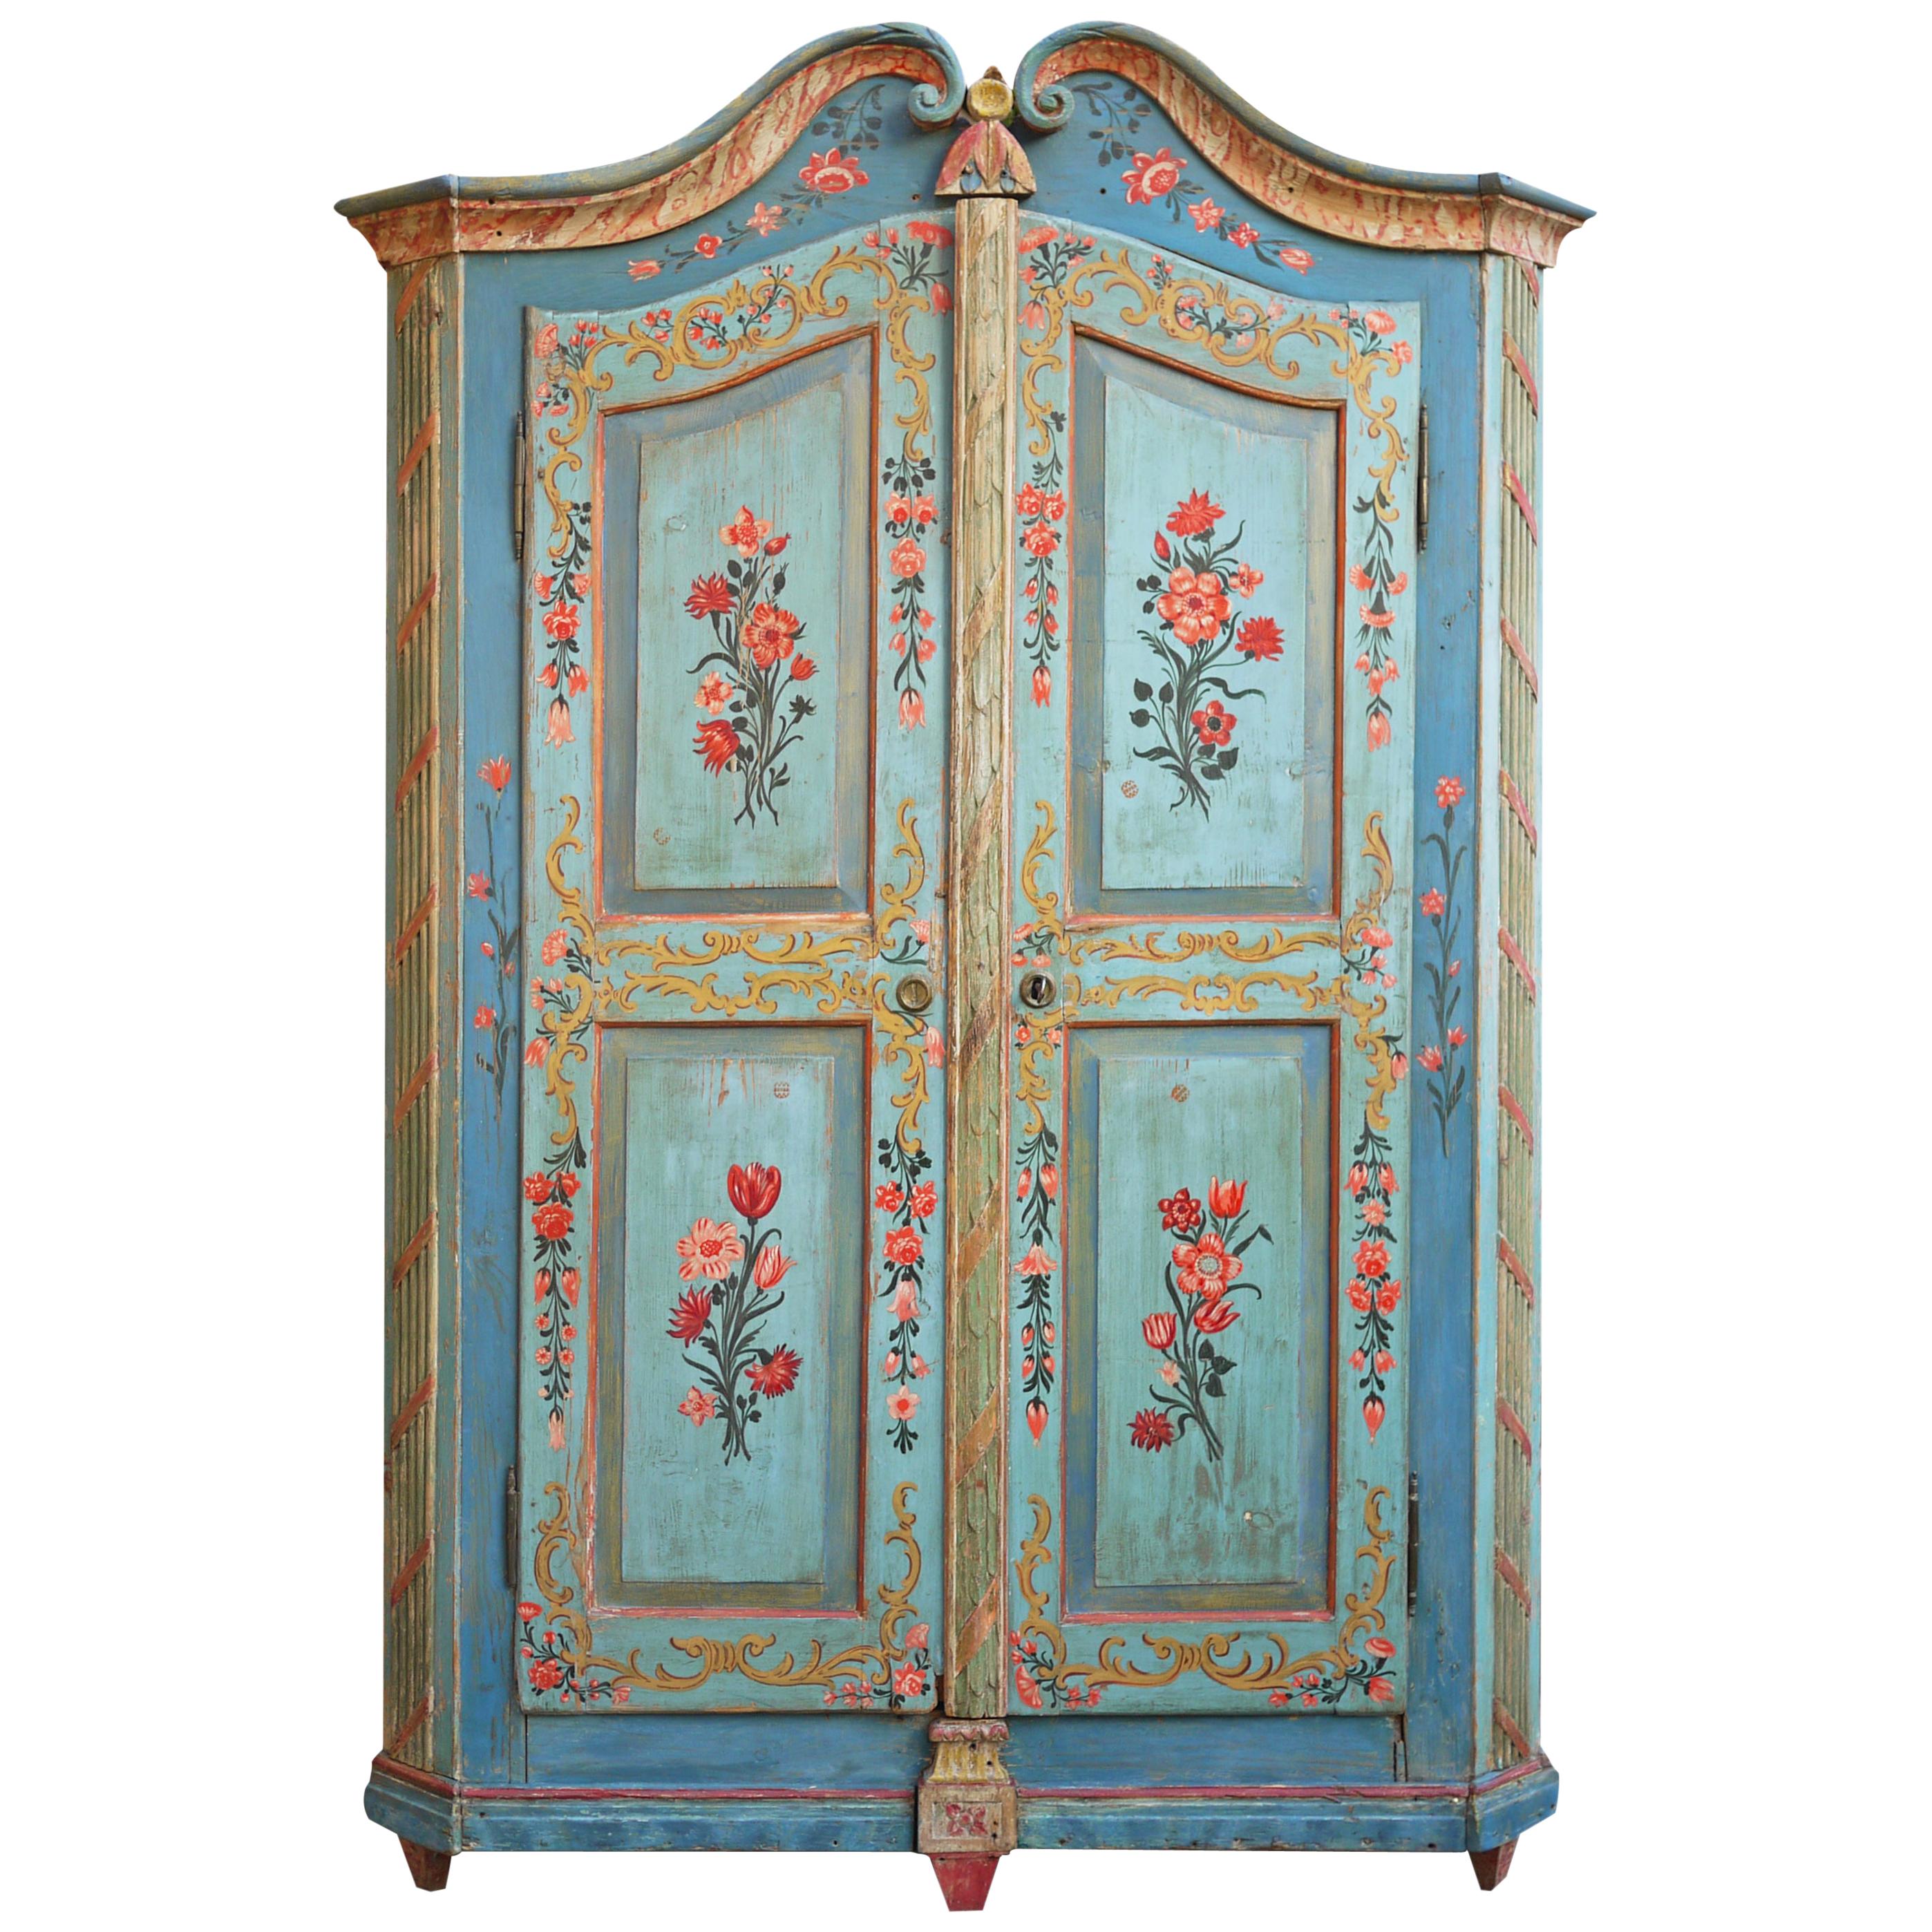 Cabinet, Blue Floral Painted Wardrobe, Early 19th Century, Central Europe